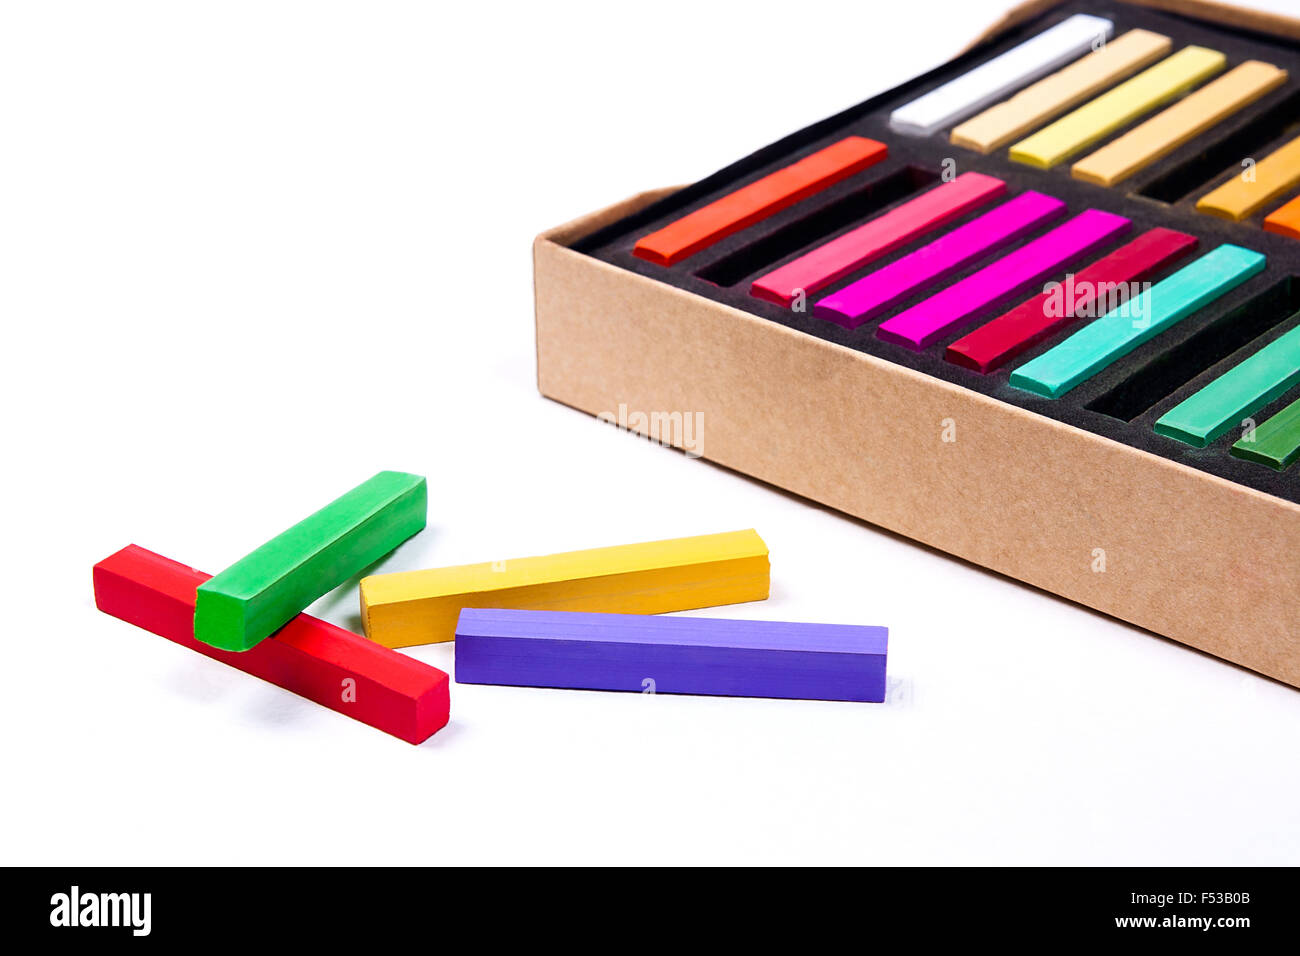 Close up view of the colorful chalk pastels and box on the white background. Stock Photo